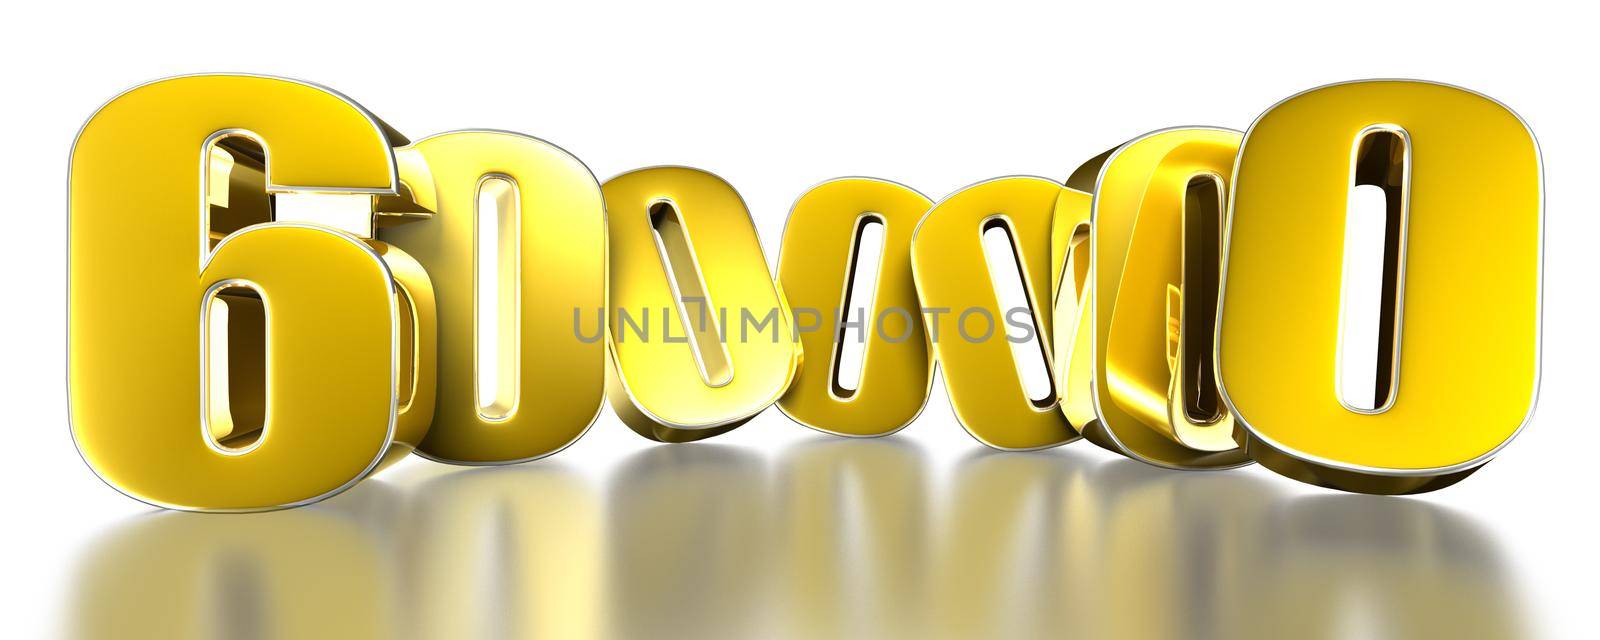 6 000 000 gold 3D illustration on white background with clipping path.